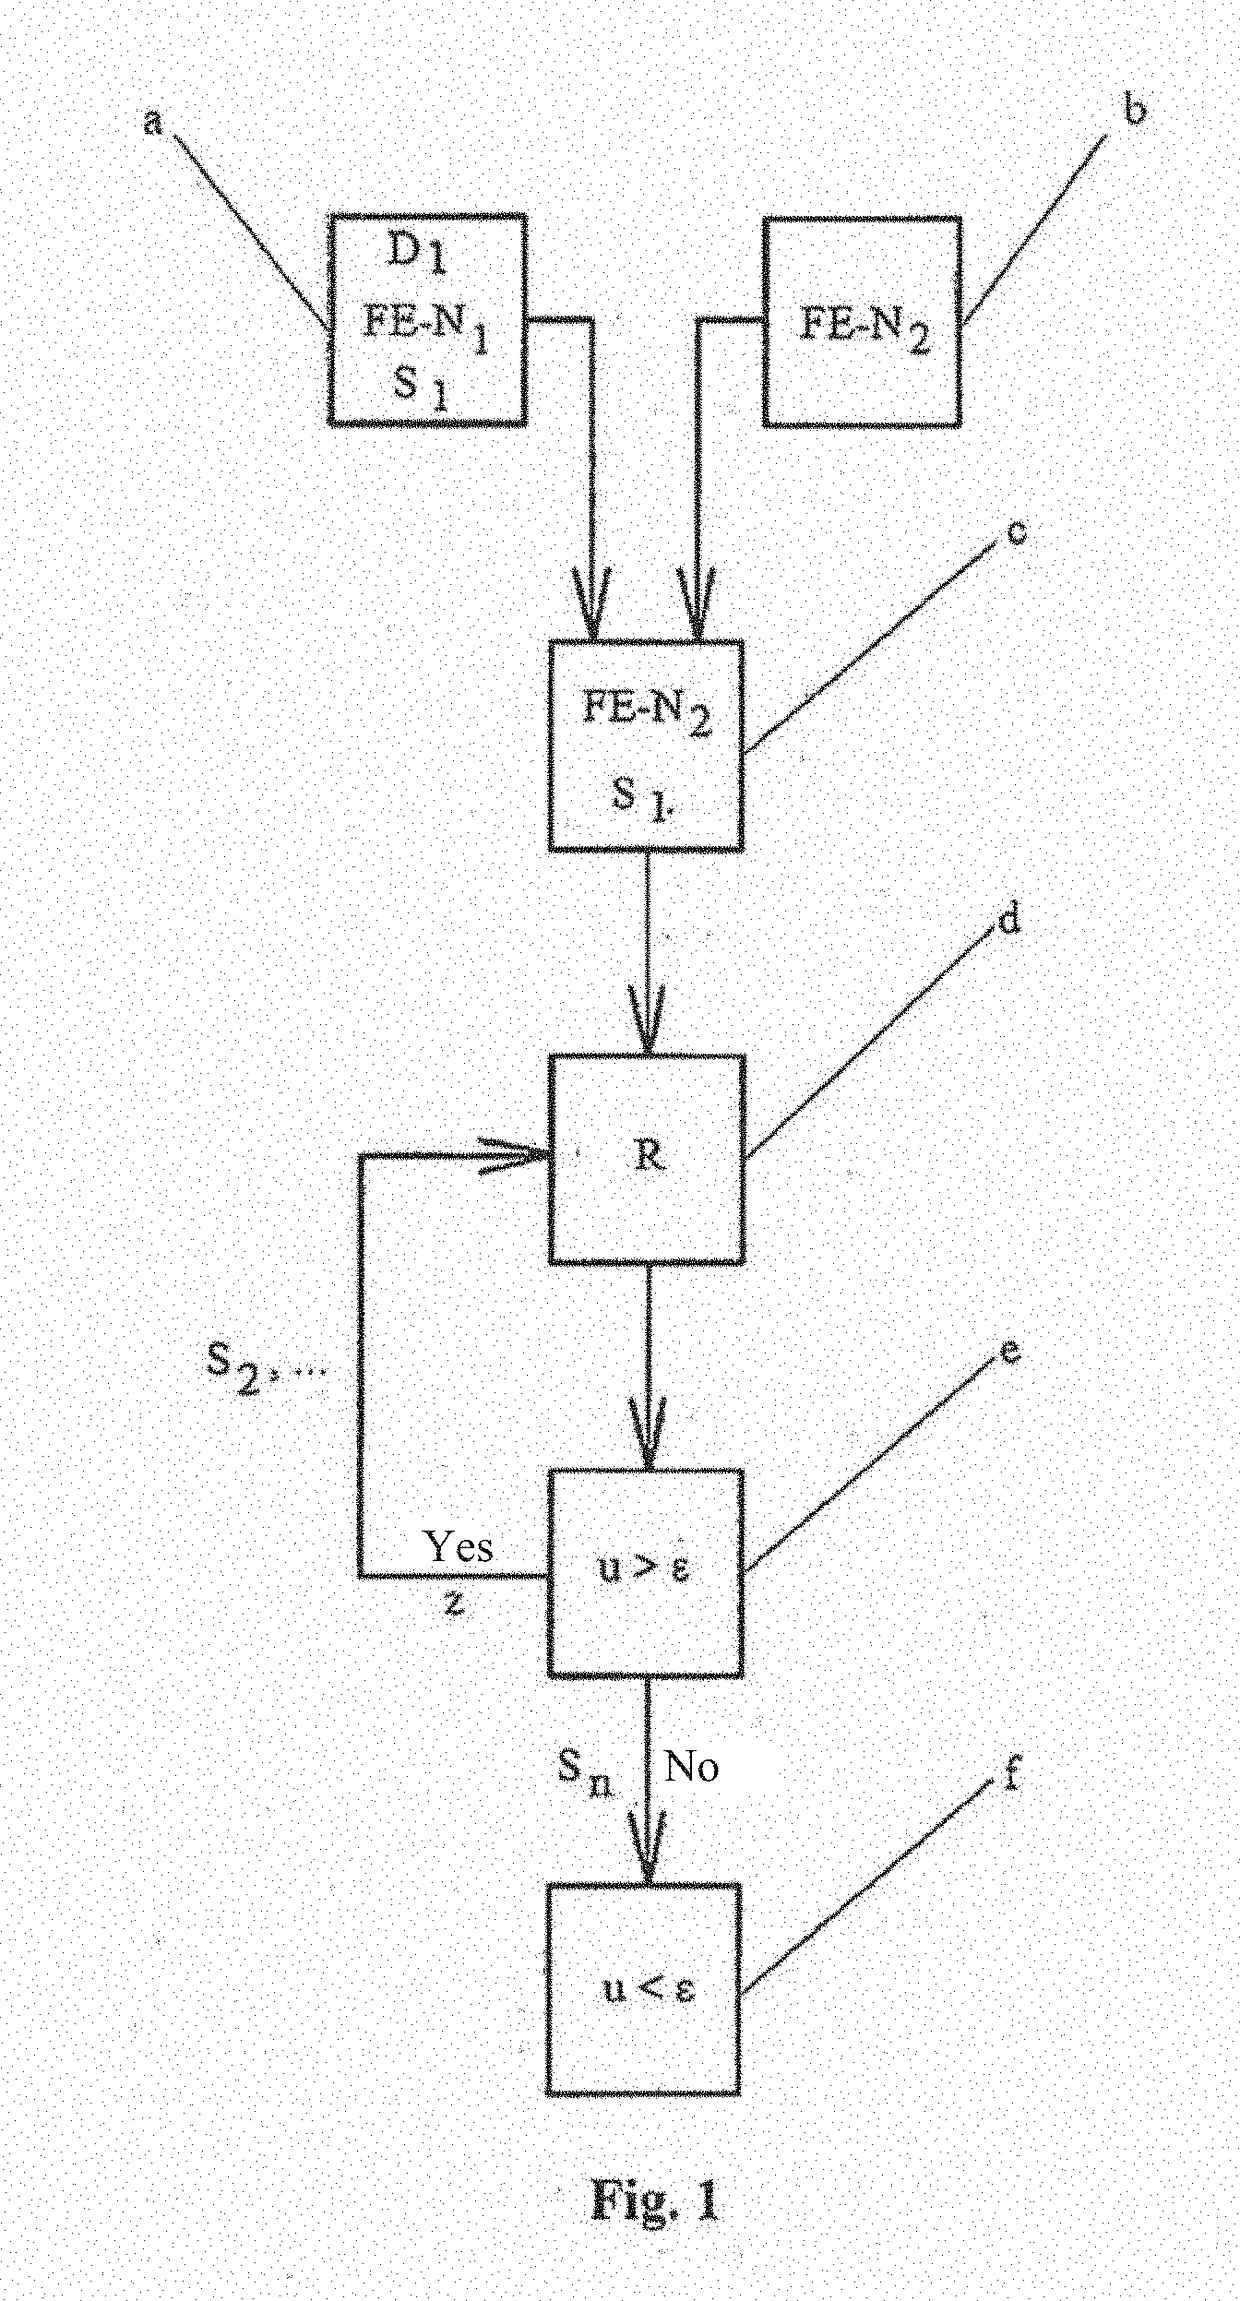 Method for transferring a stress state (stress sensor) of an FE simulation result to a new FE mesh geometry of a modeled construction system in a simulation chain of production operations